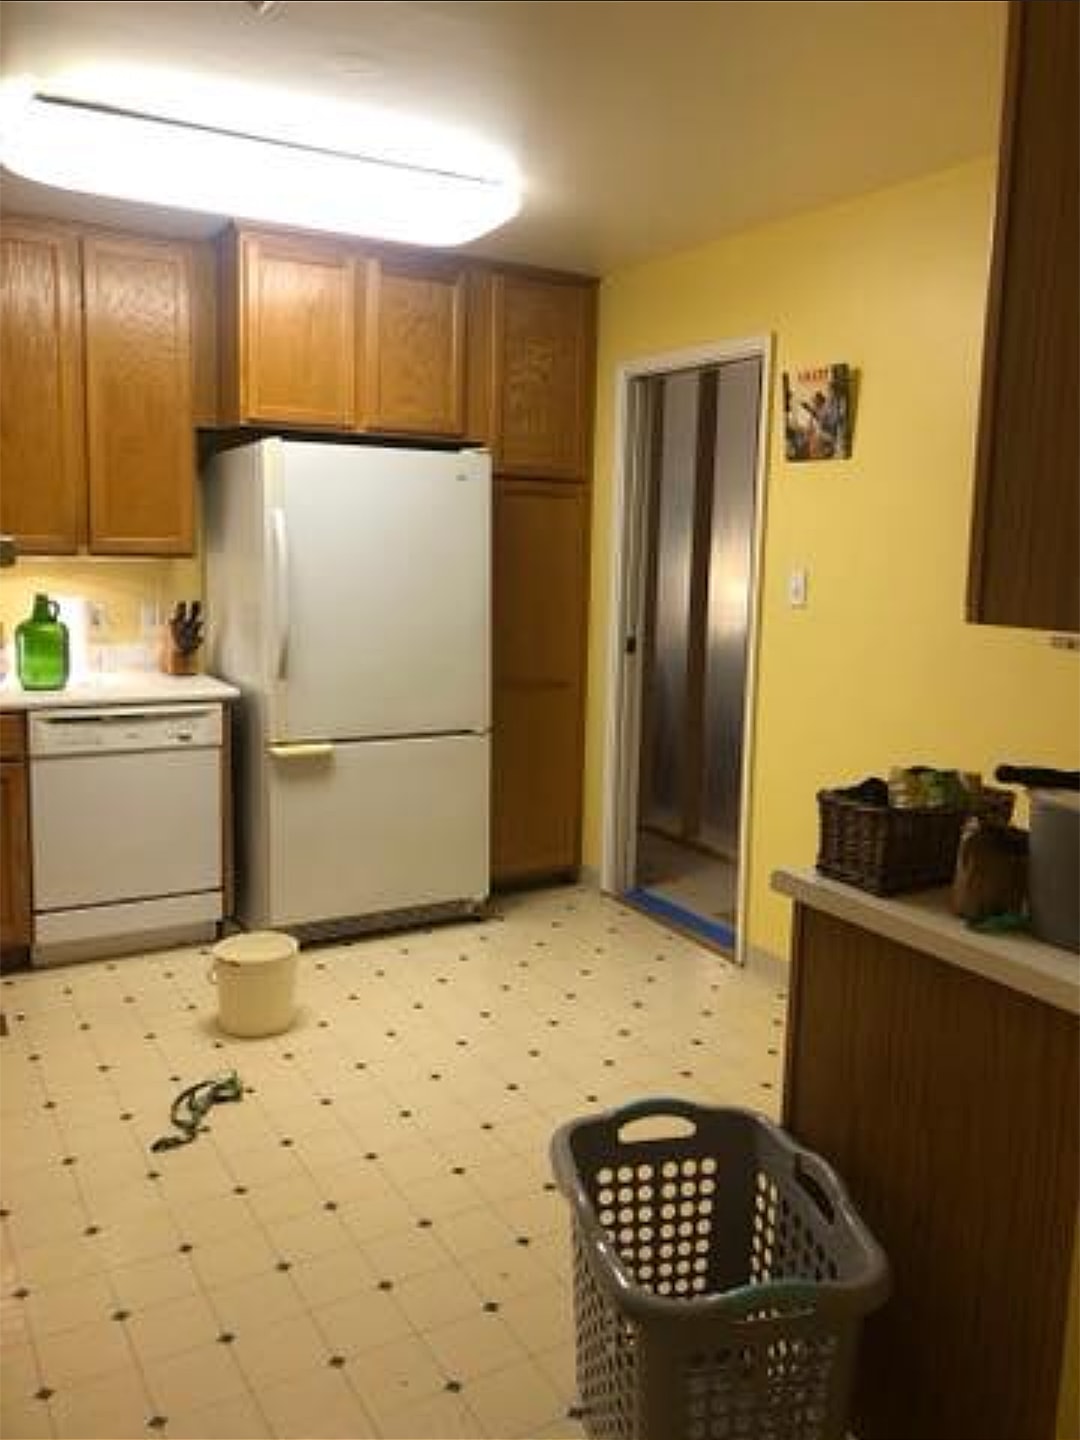 One Decision Saved This Homeowner $9,000 on Her Kitchen Transformation